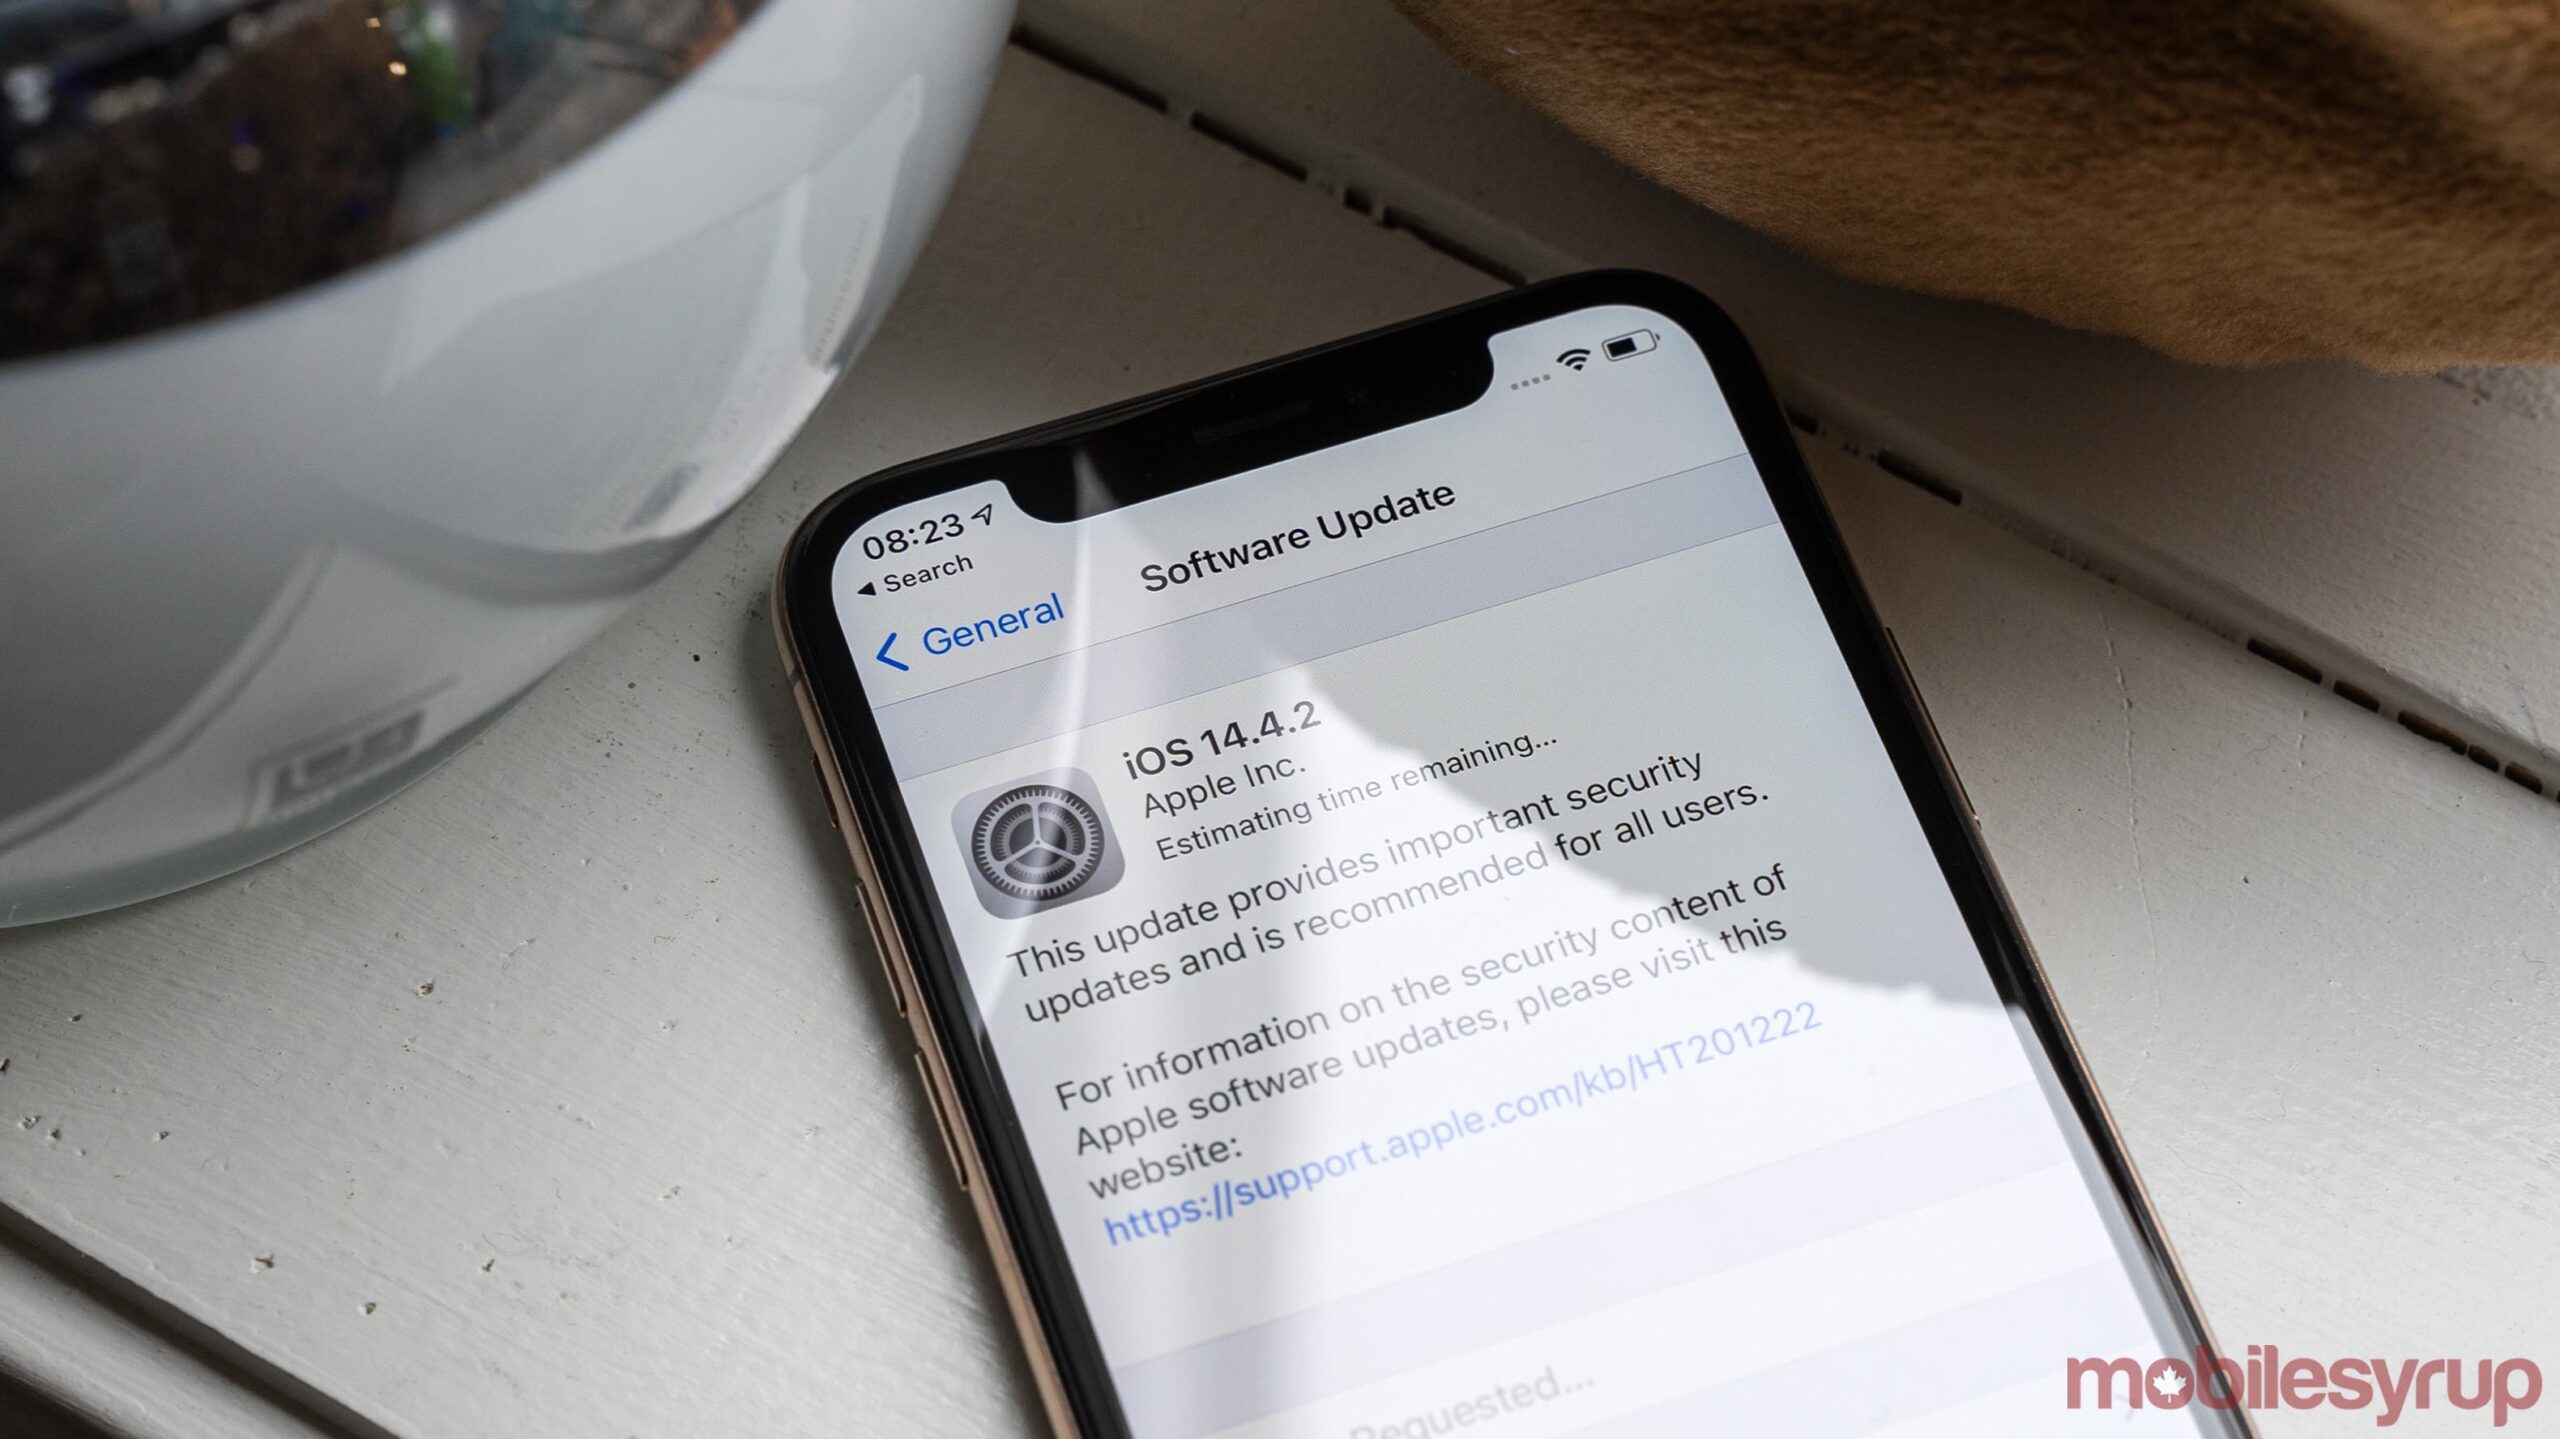 iOS 14.4.2 software update on iPhone